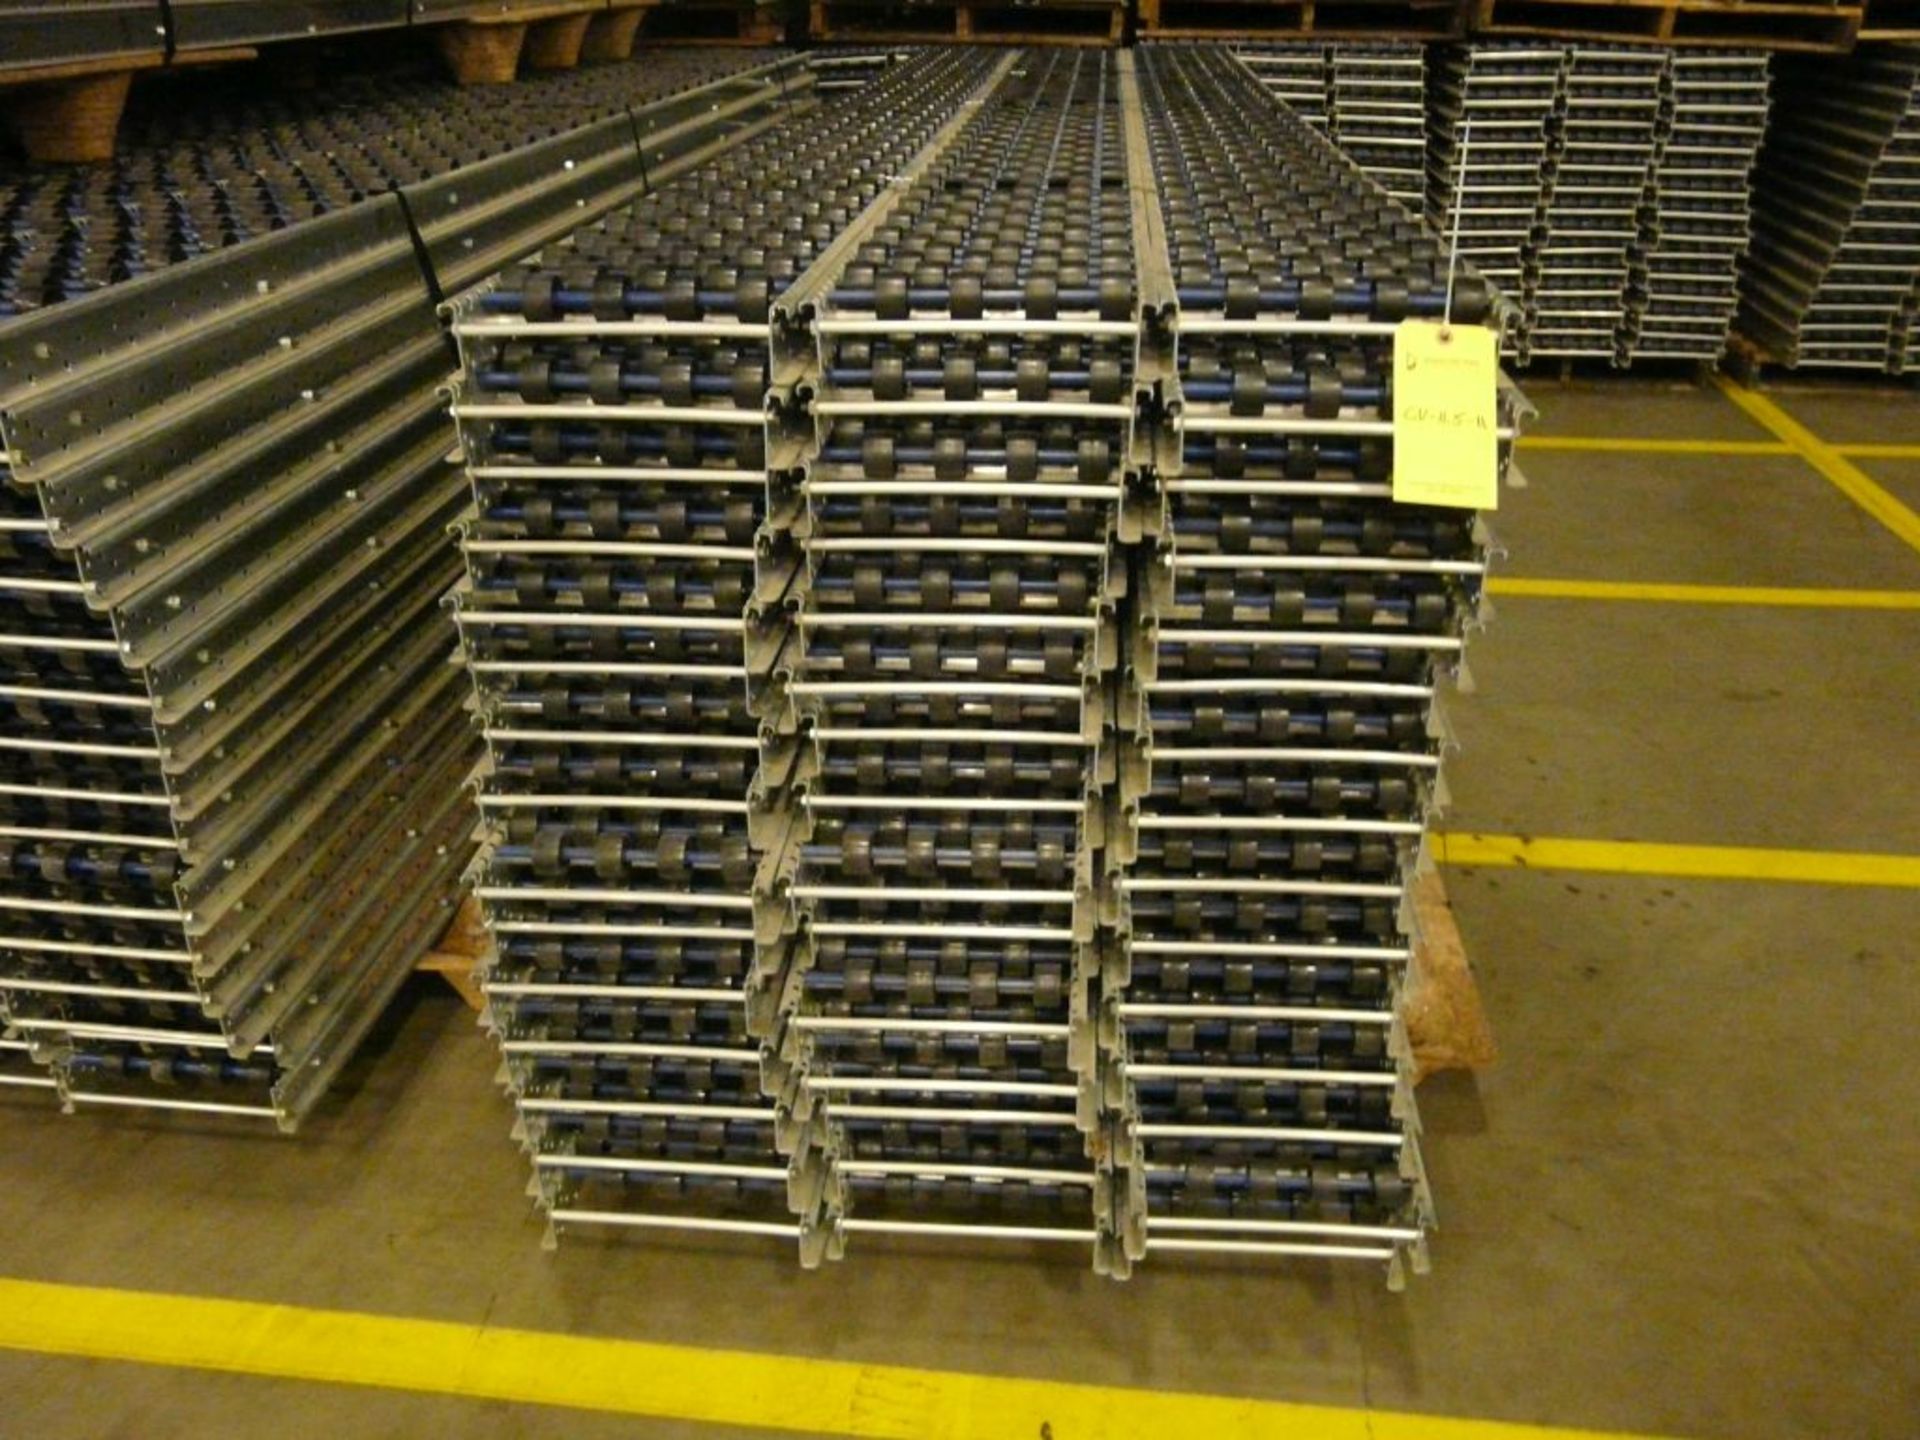 Lot of (90) SpanTrack Wheelbed Carton Flow Conveyors - 11.5'L x 11"W; Tag: 223593 - $30 Lot - Image 2 of 4